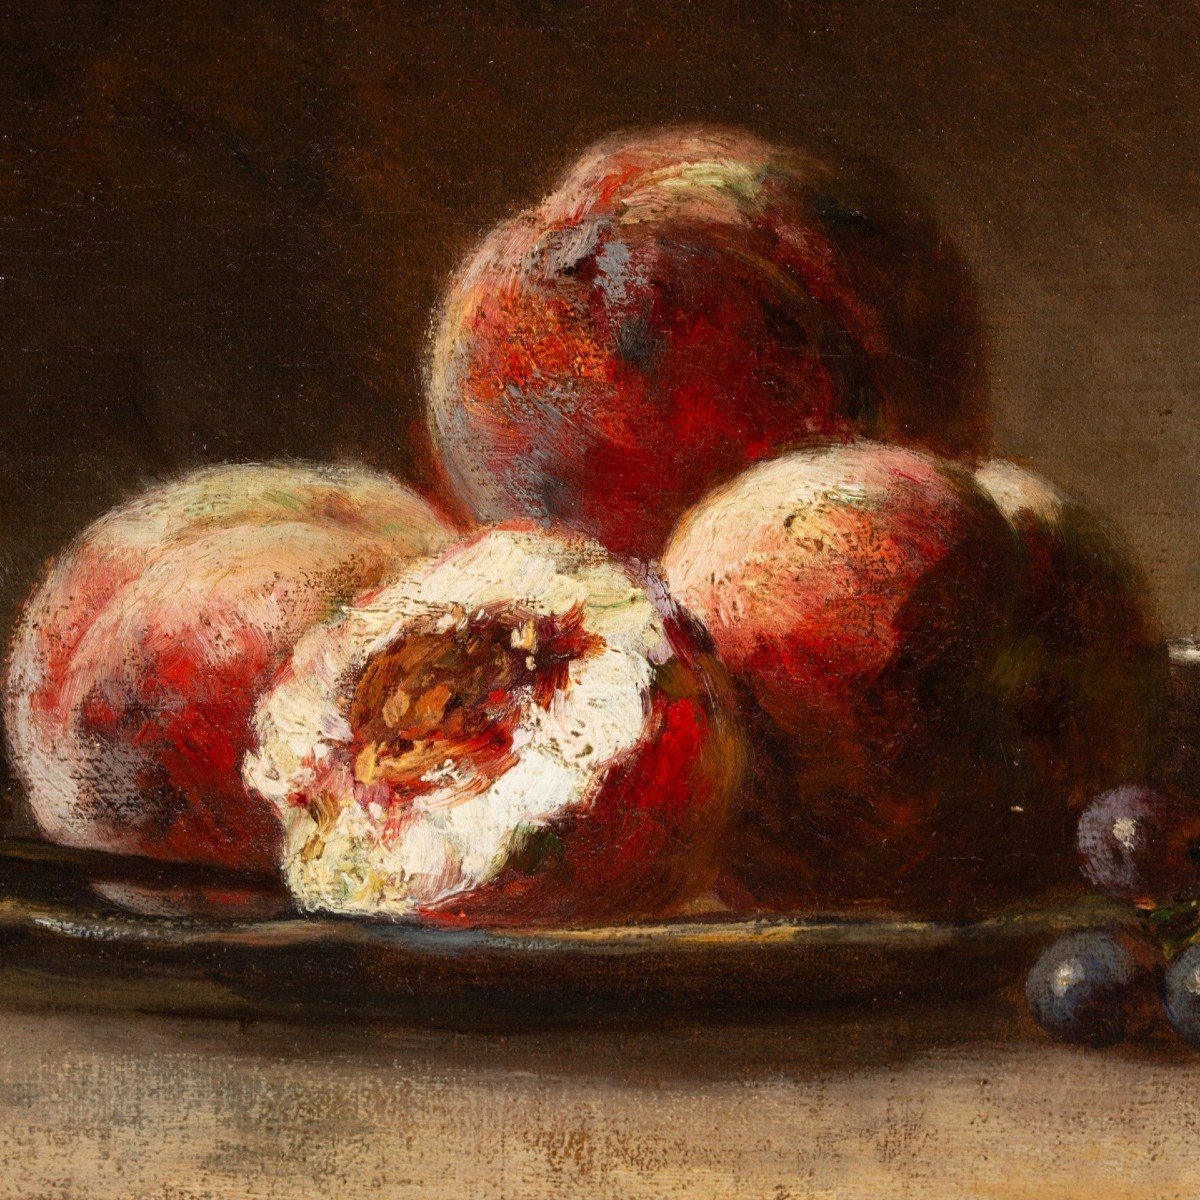 Still Life With Fruits By Euphémie Muraton (1840-1914)